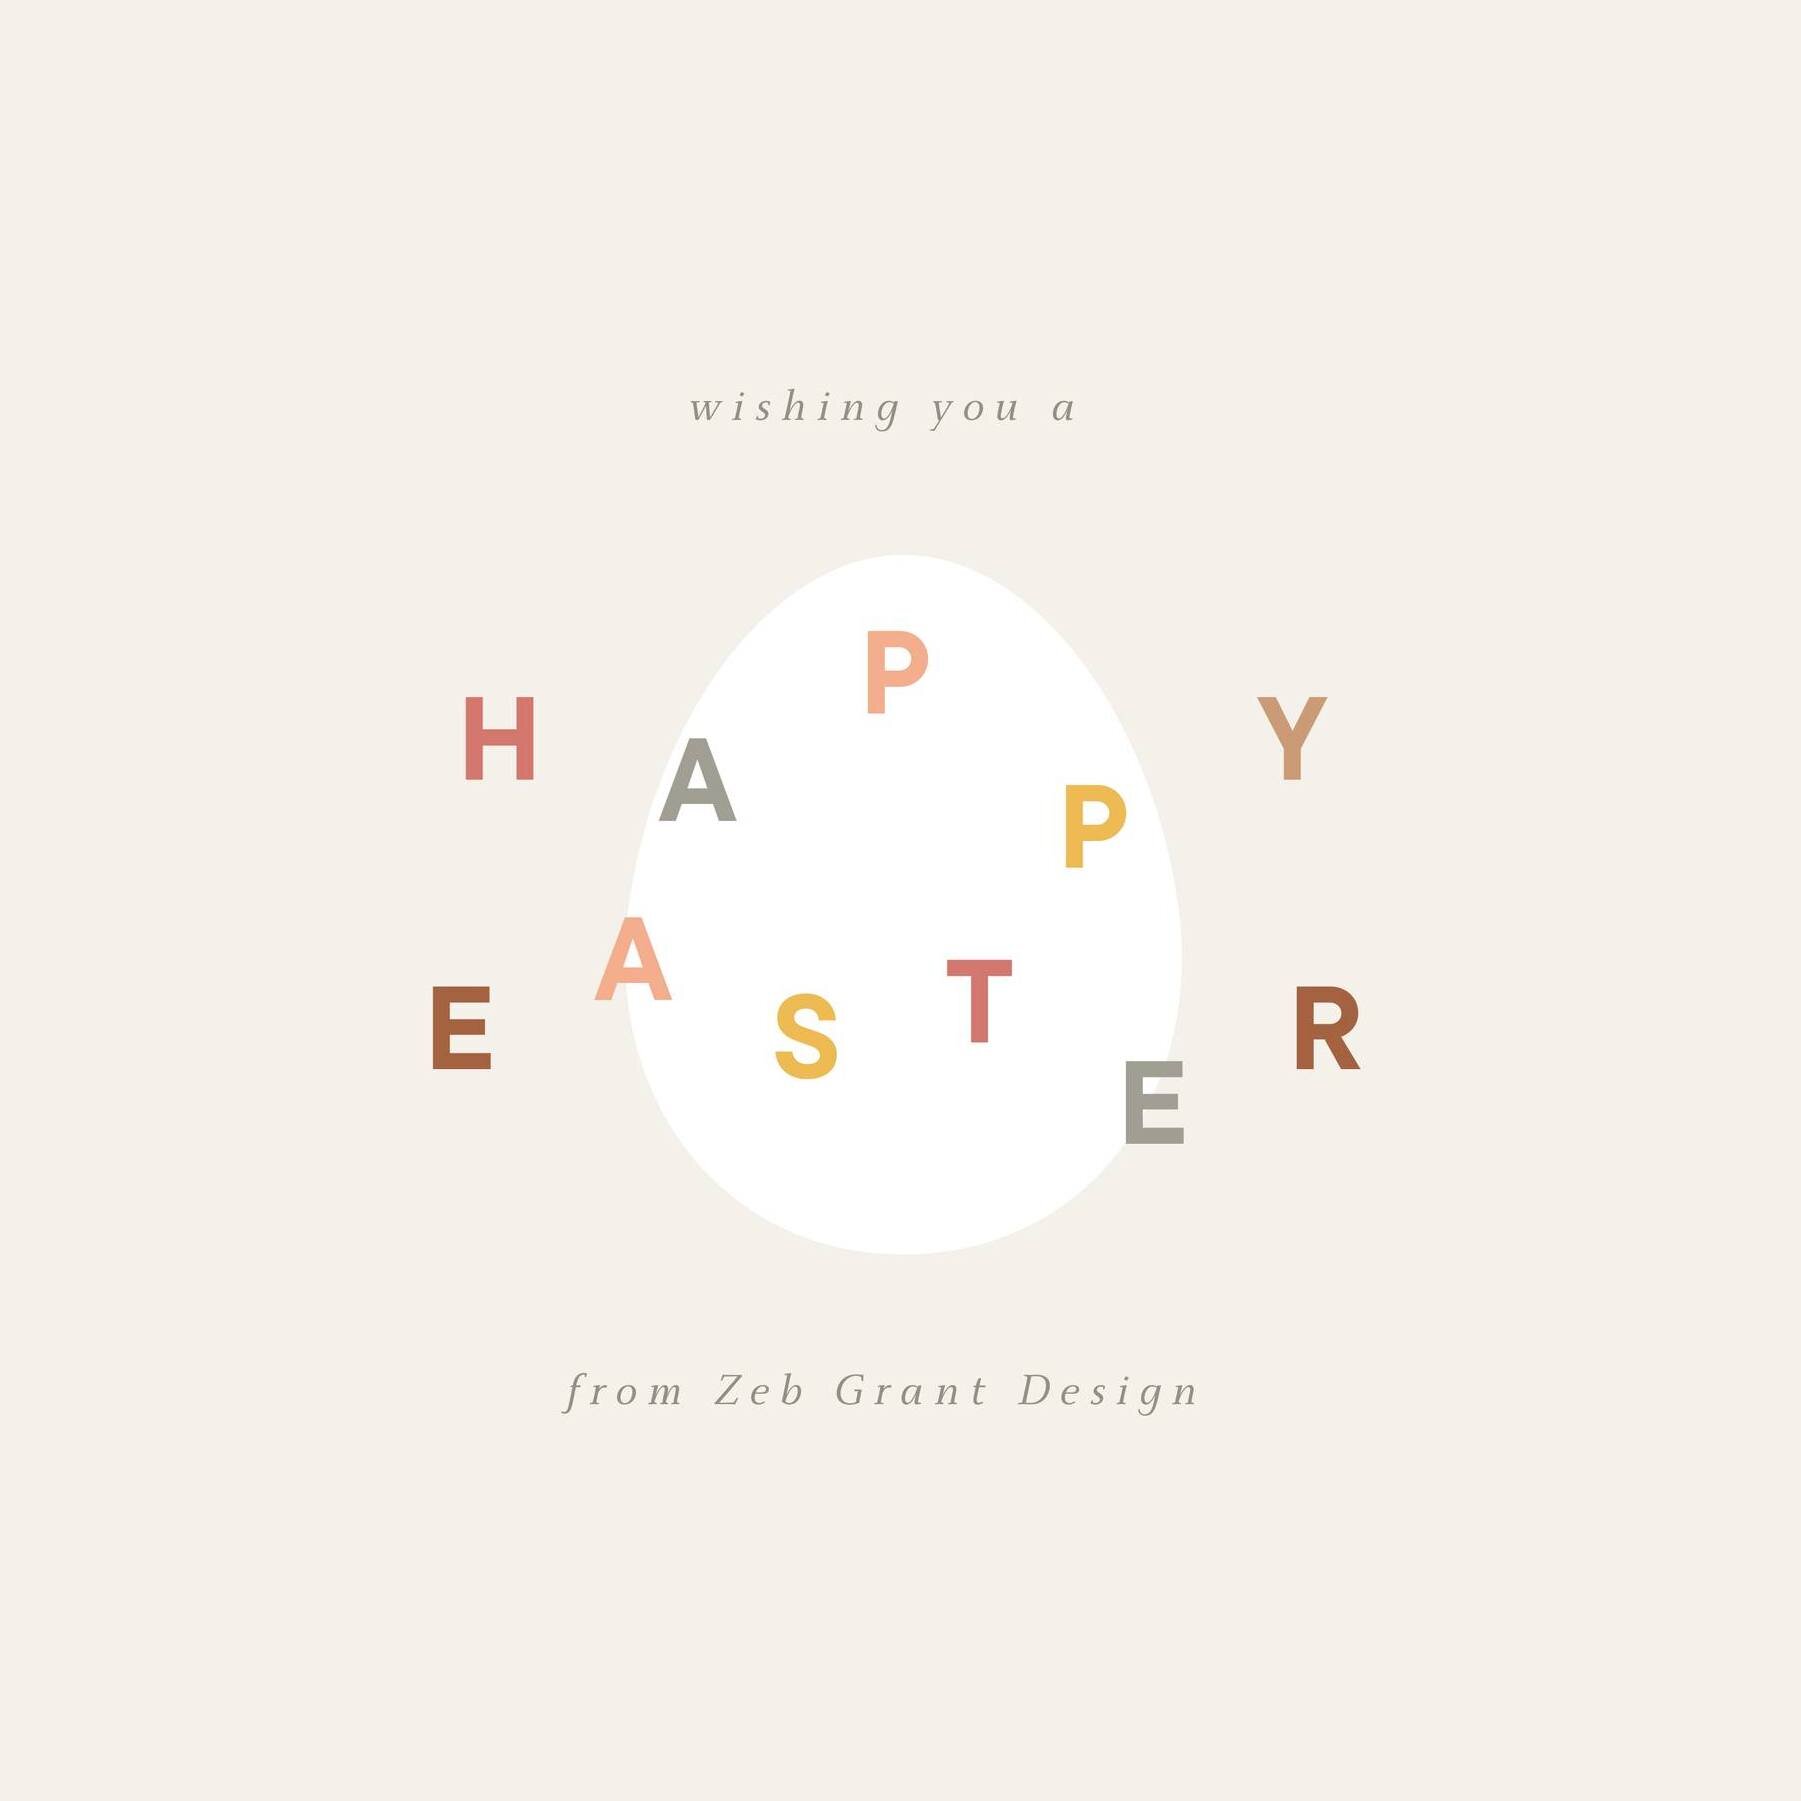 We hope you have a great Easter Sunday!